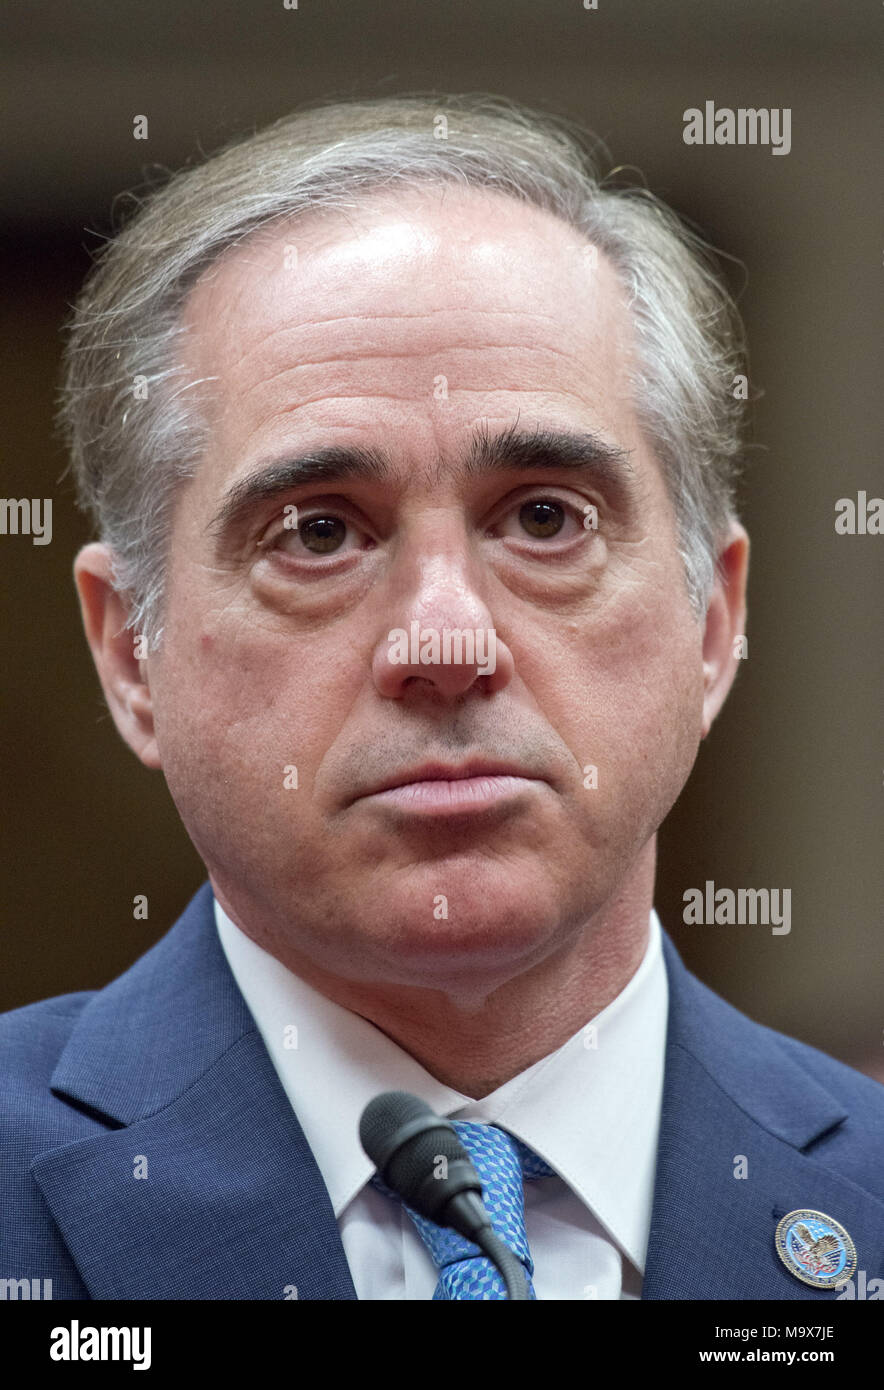 March 28, 2018 - (File Photo) - Veterans Affairs secretary David Shulkin is ousted in the wake of an ethics scandal. PICTURED: May 11, 2017 - Washington, District of Columbia, United States of America - United States Secretary of Veterans Affairs DAVID J. SHULKIN, M.D., testifies before the US Senate Committee on Appropriations Subcommittee on Military Construction, Veterans Affairs, and Related Agencies on ''Reducing Burden & Increasing Access to Healthcare: Improving VA Community Care'' on Capitol Hill. Credit: Ron Sachs/CNP/ZUMA Wire/Alamy Live News Stock Photo